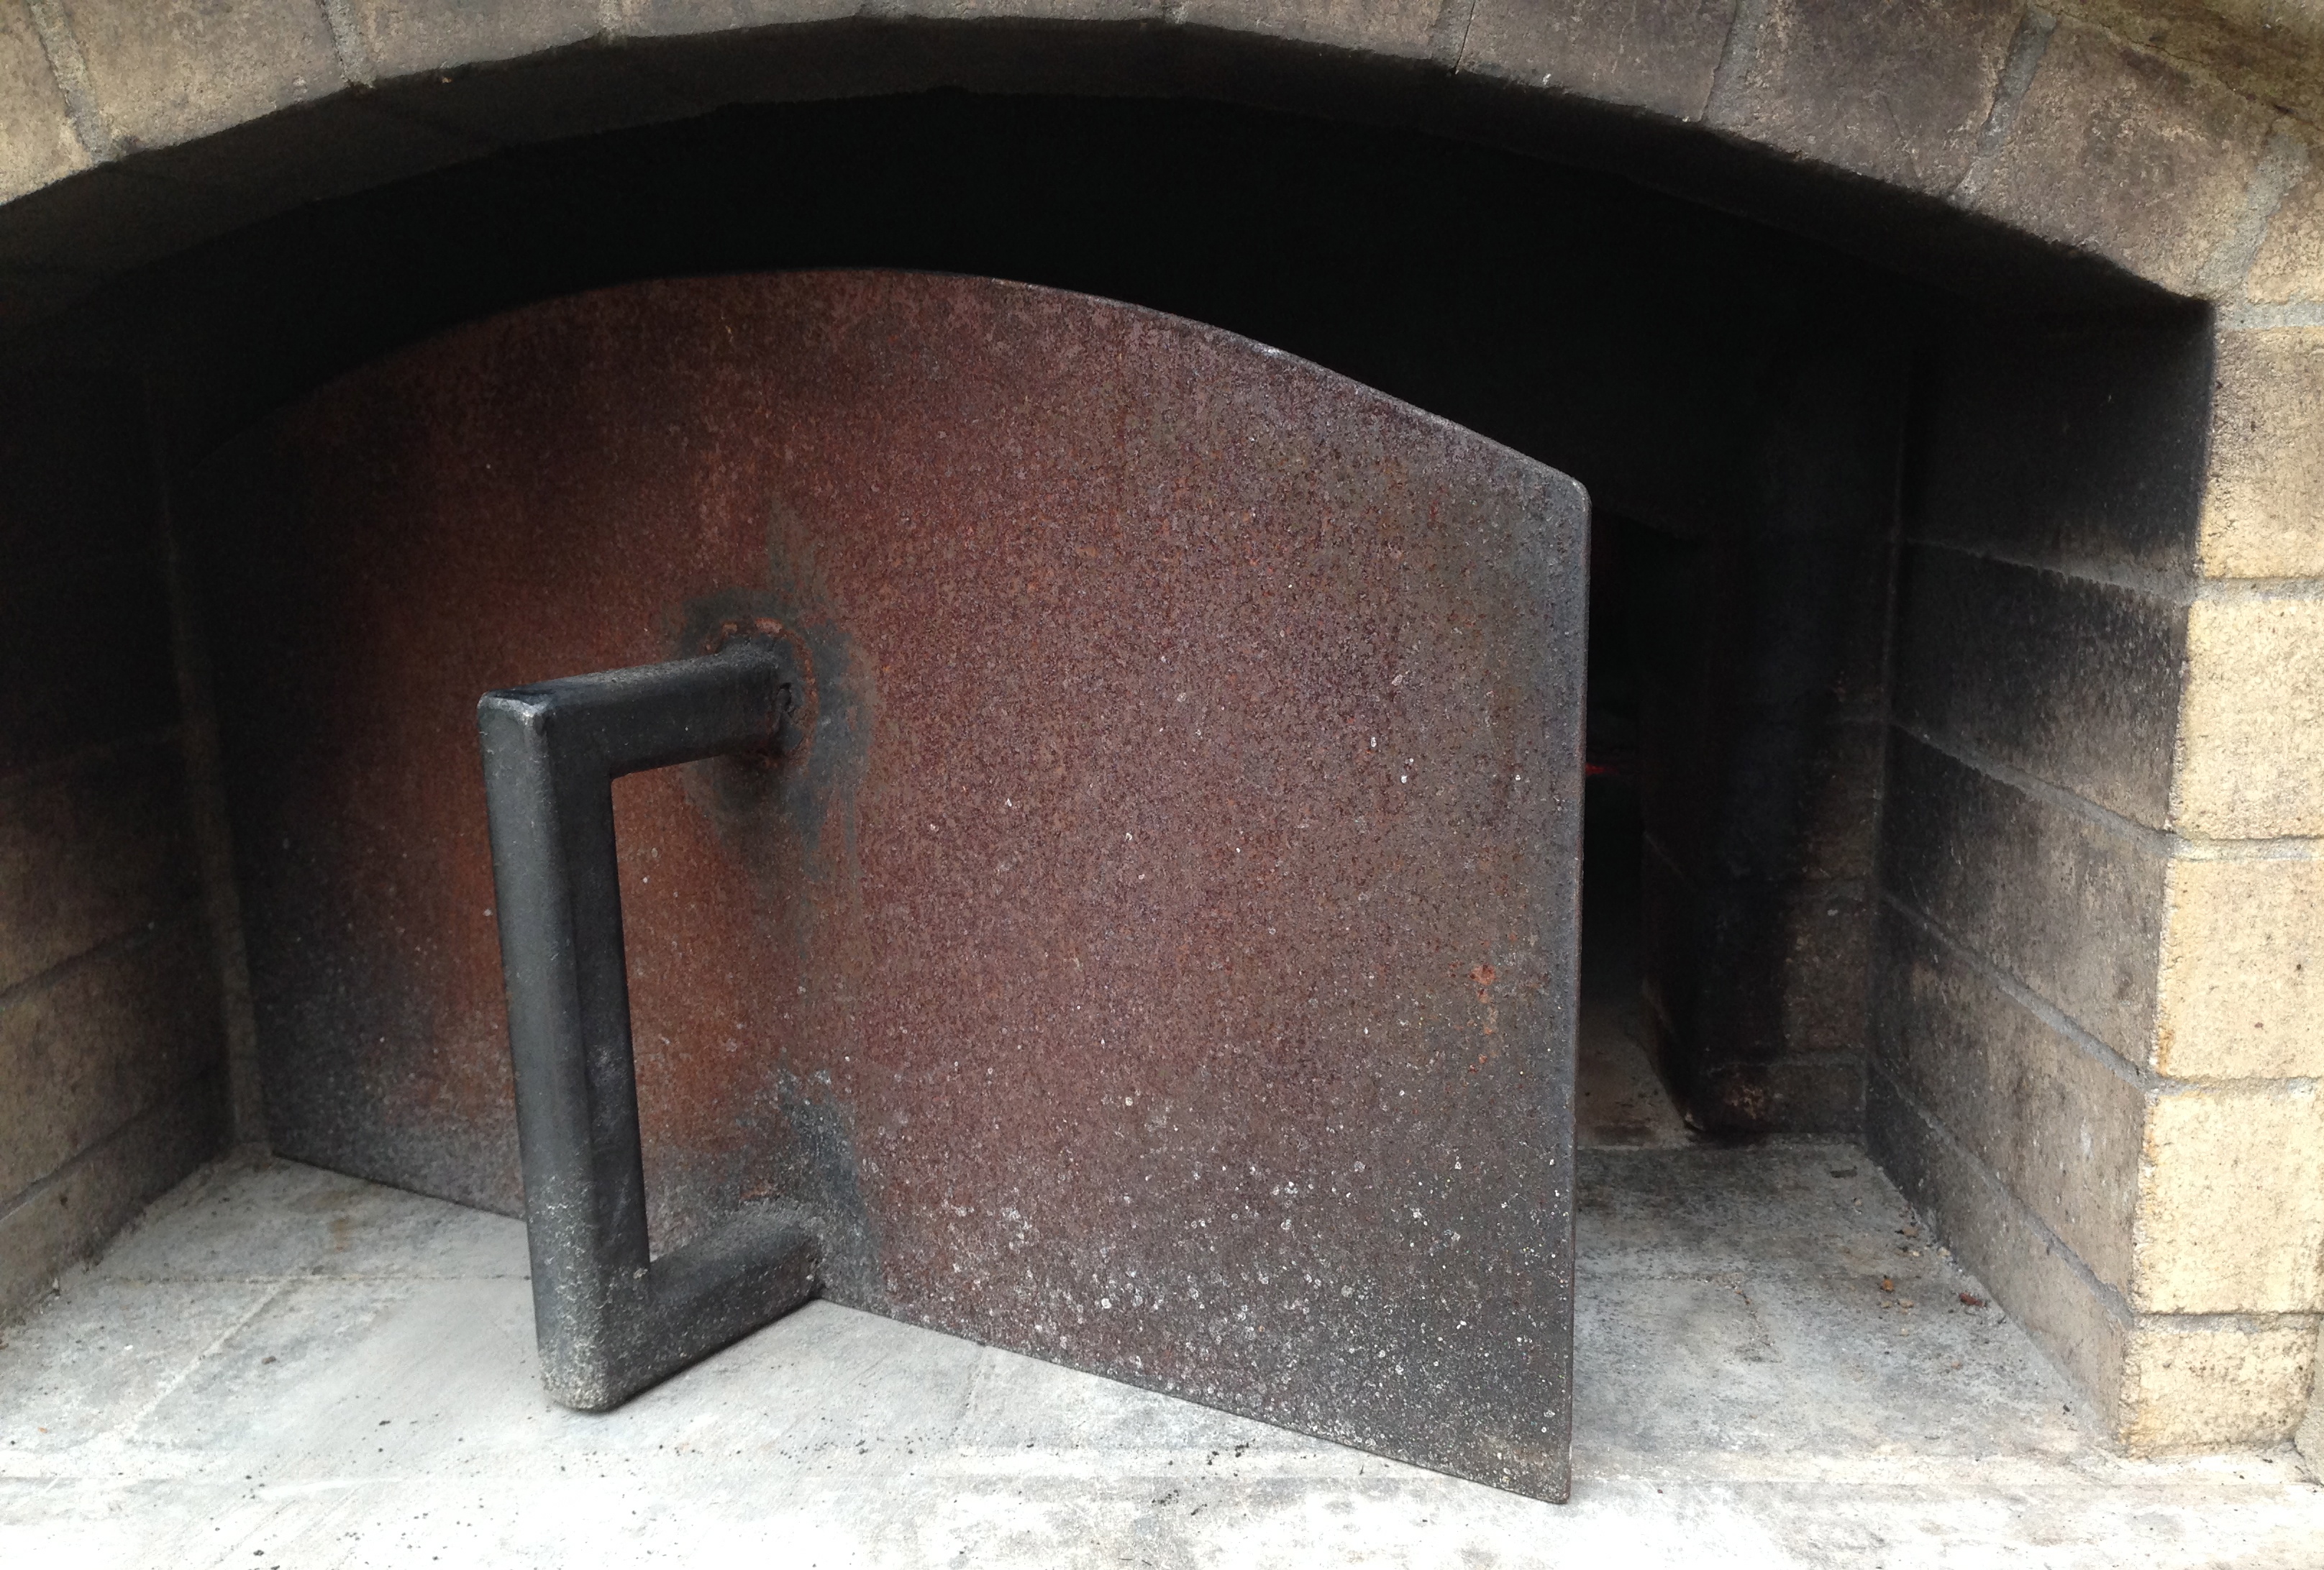 Wood-fired Pizza Oven